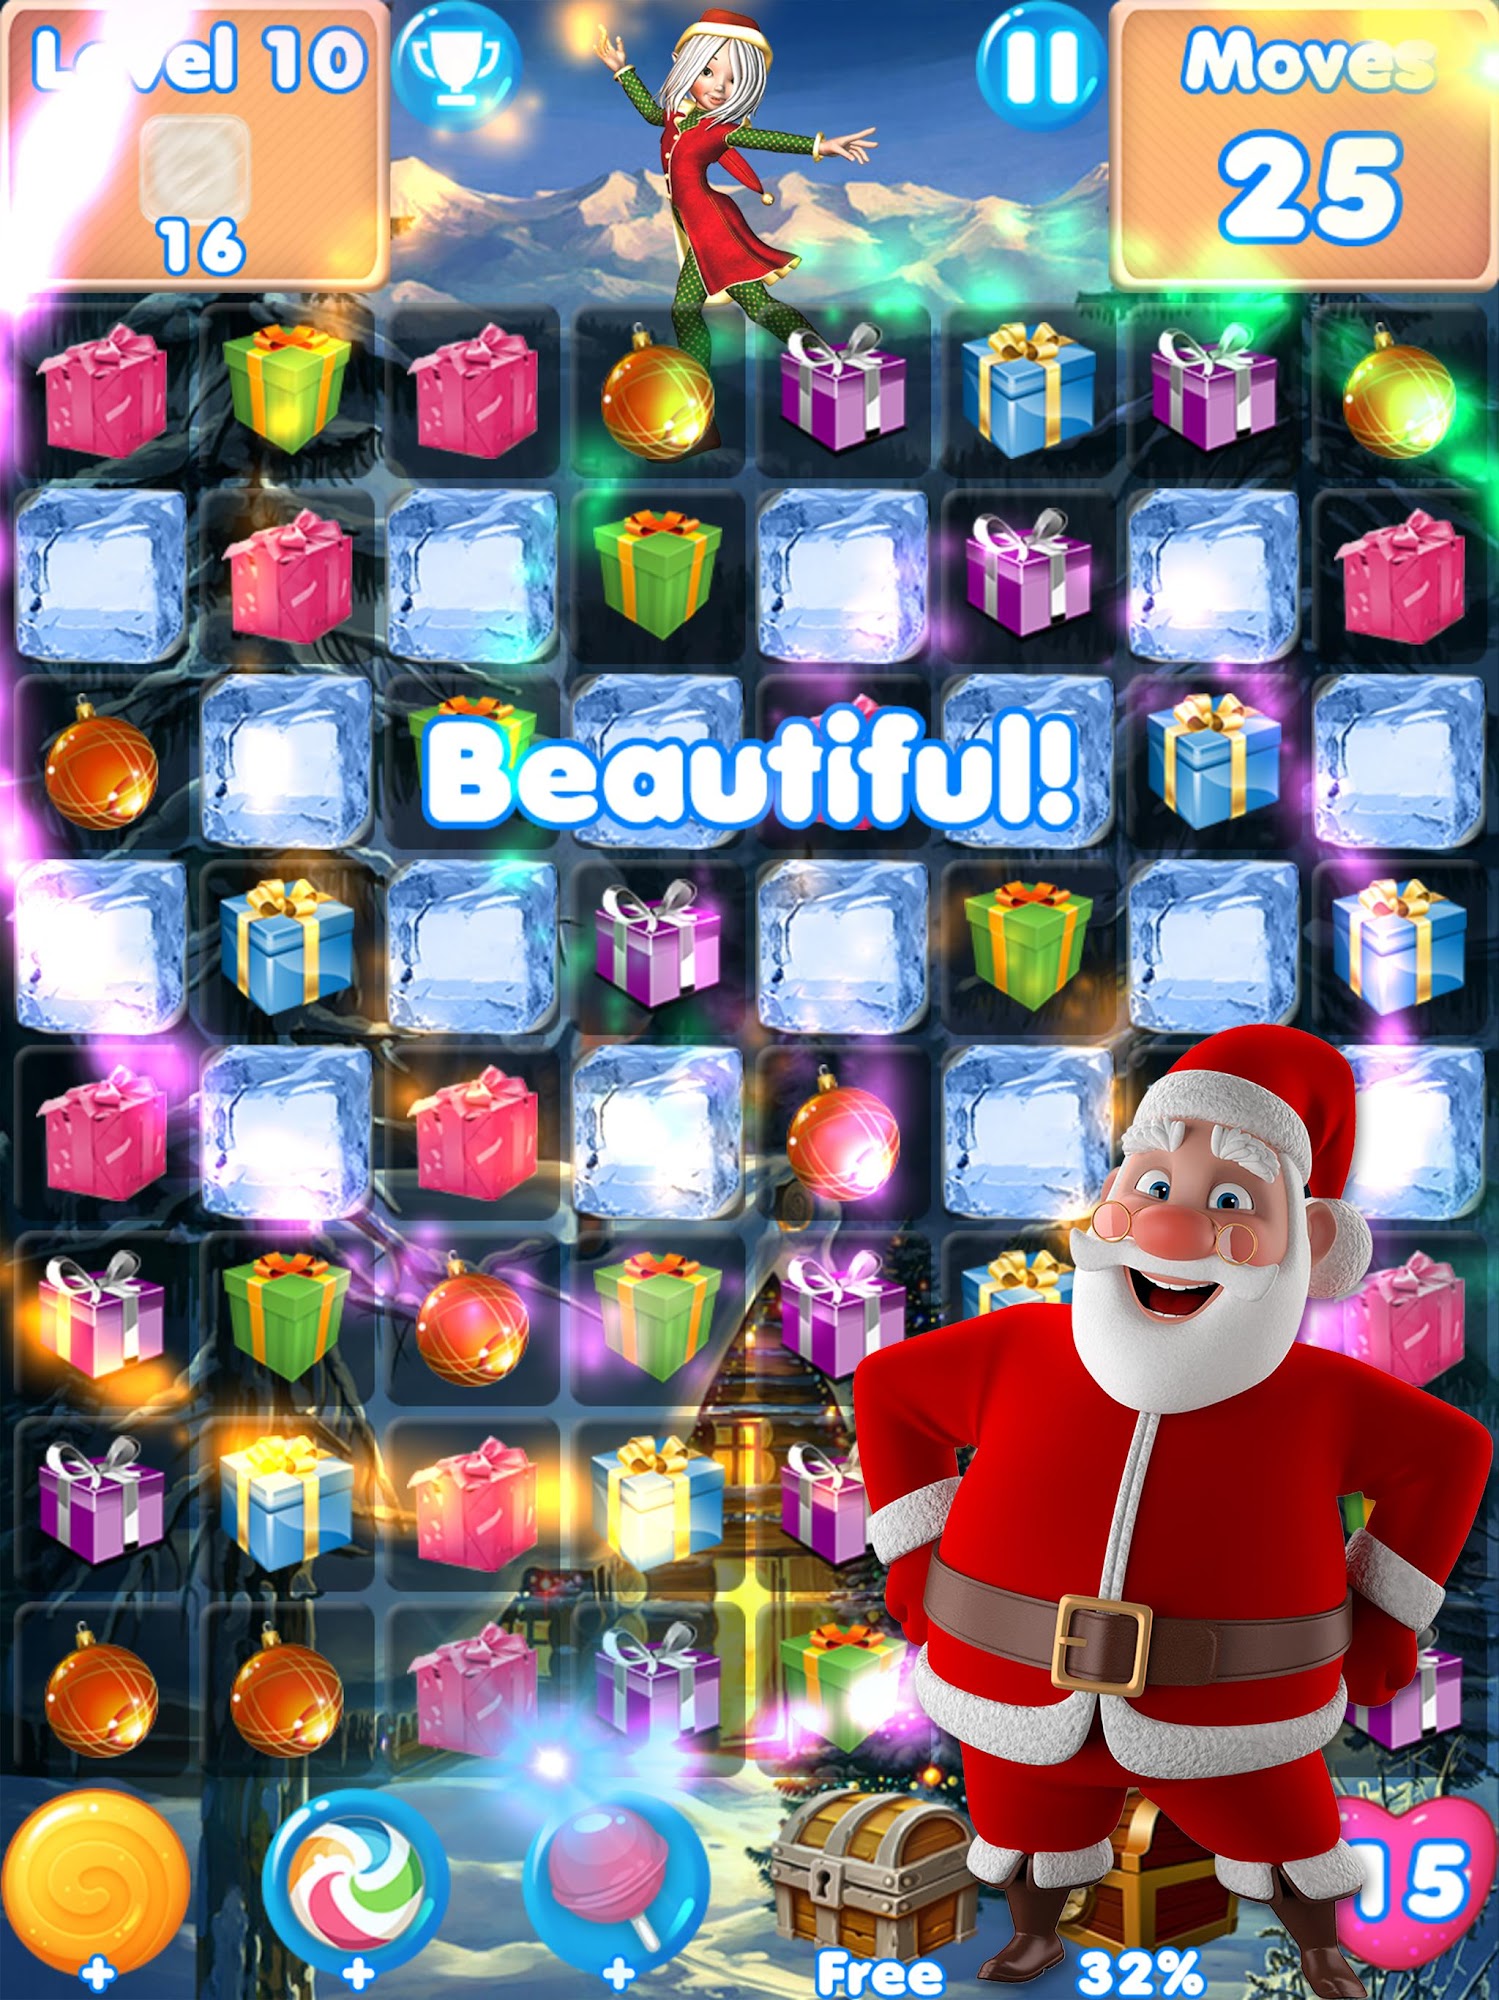 Download Christmas Games - santa match 3 games without wifi für Android kostenlos.